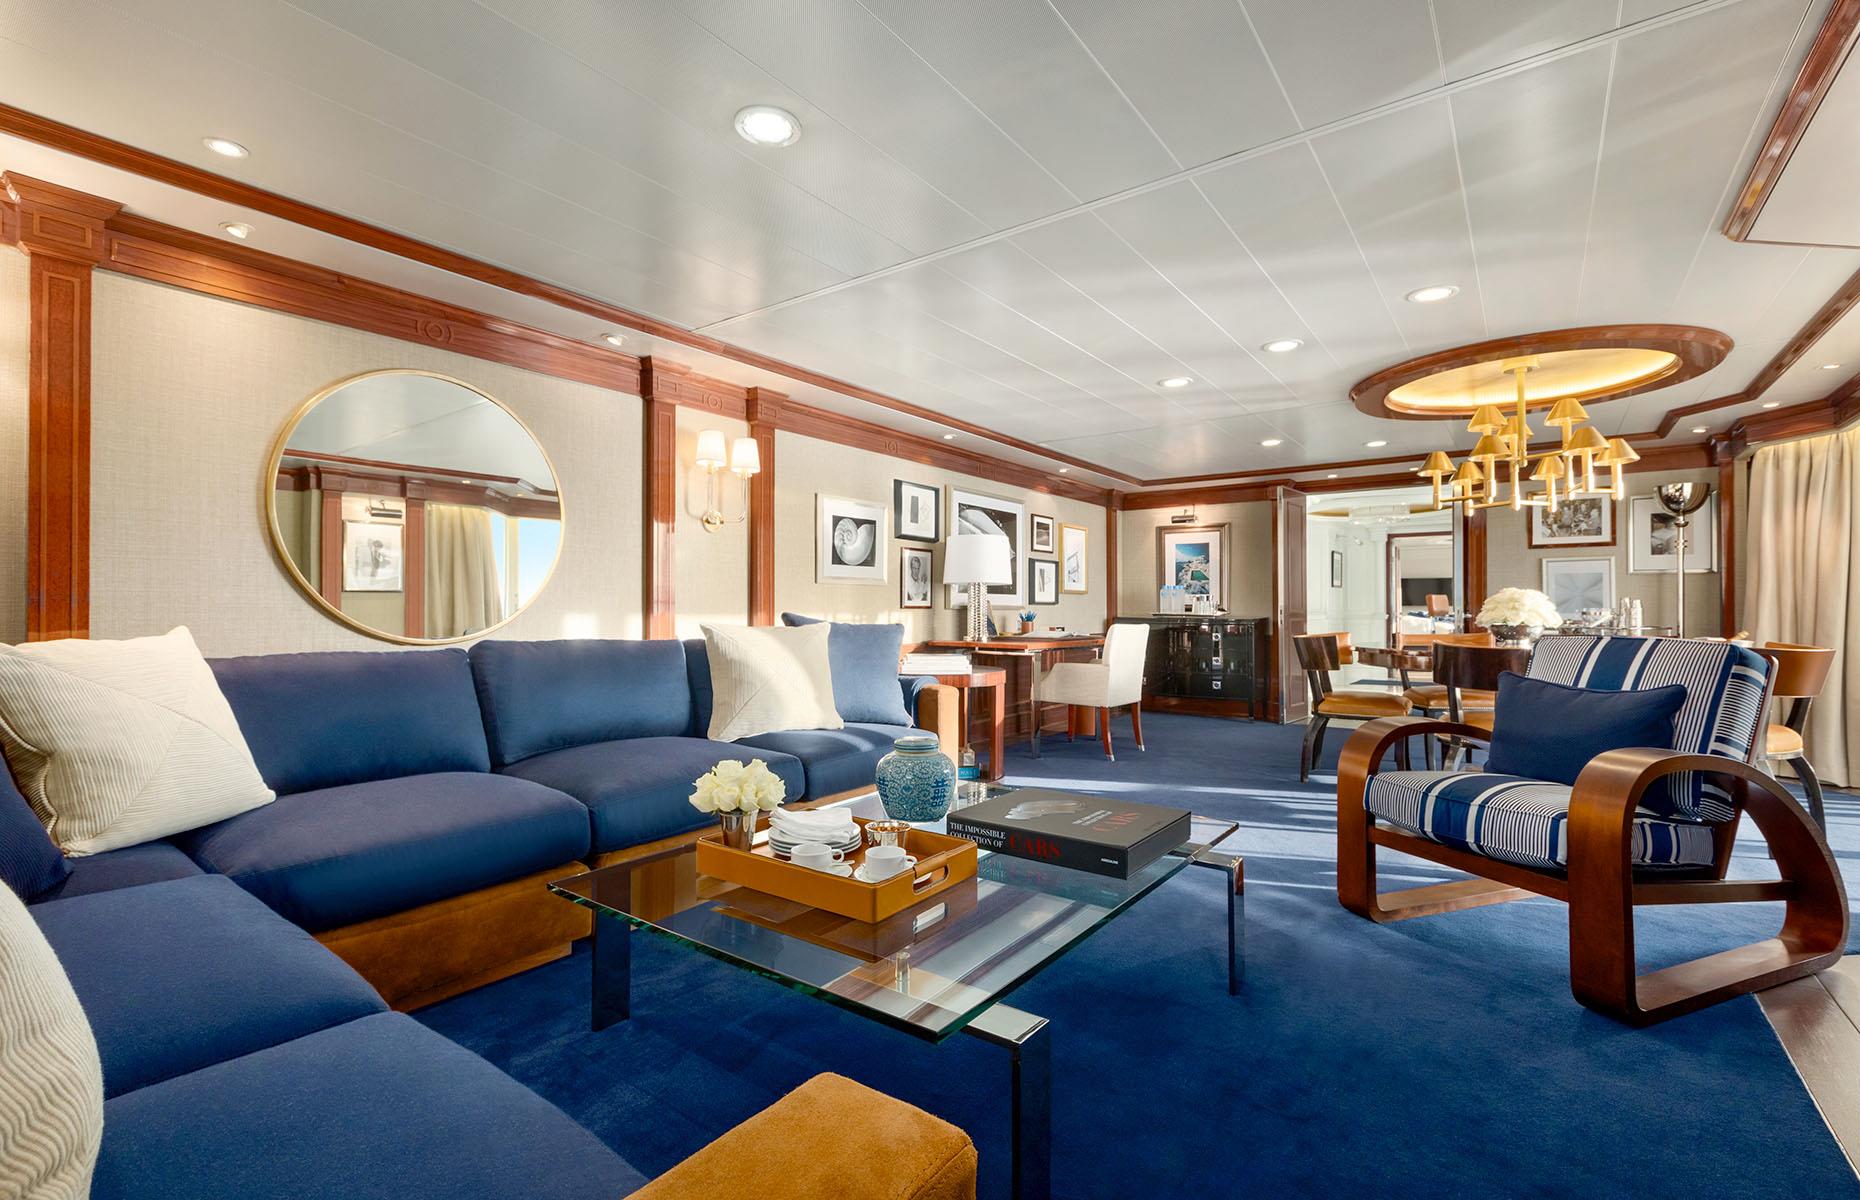 Collaborations between cruise lines and famous names in the world of food and entertainment are common, and now some of the world’s top designers are getting in on the act. Ralph Lauren has teamed up with Oceania Cruises to ramp up the wow factor of the Owner’s Suites on Vista, which launches in May 2023. Expect the design house’s furnishings in the living rooms, dining rooms and bedrooms.